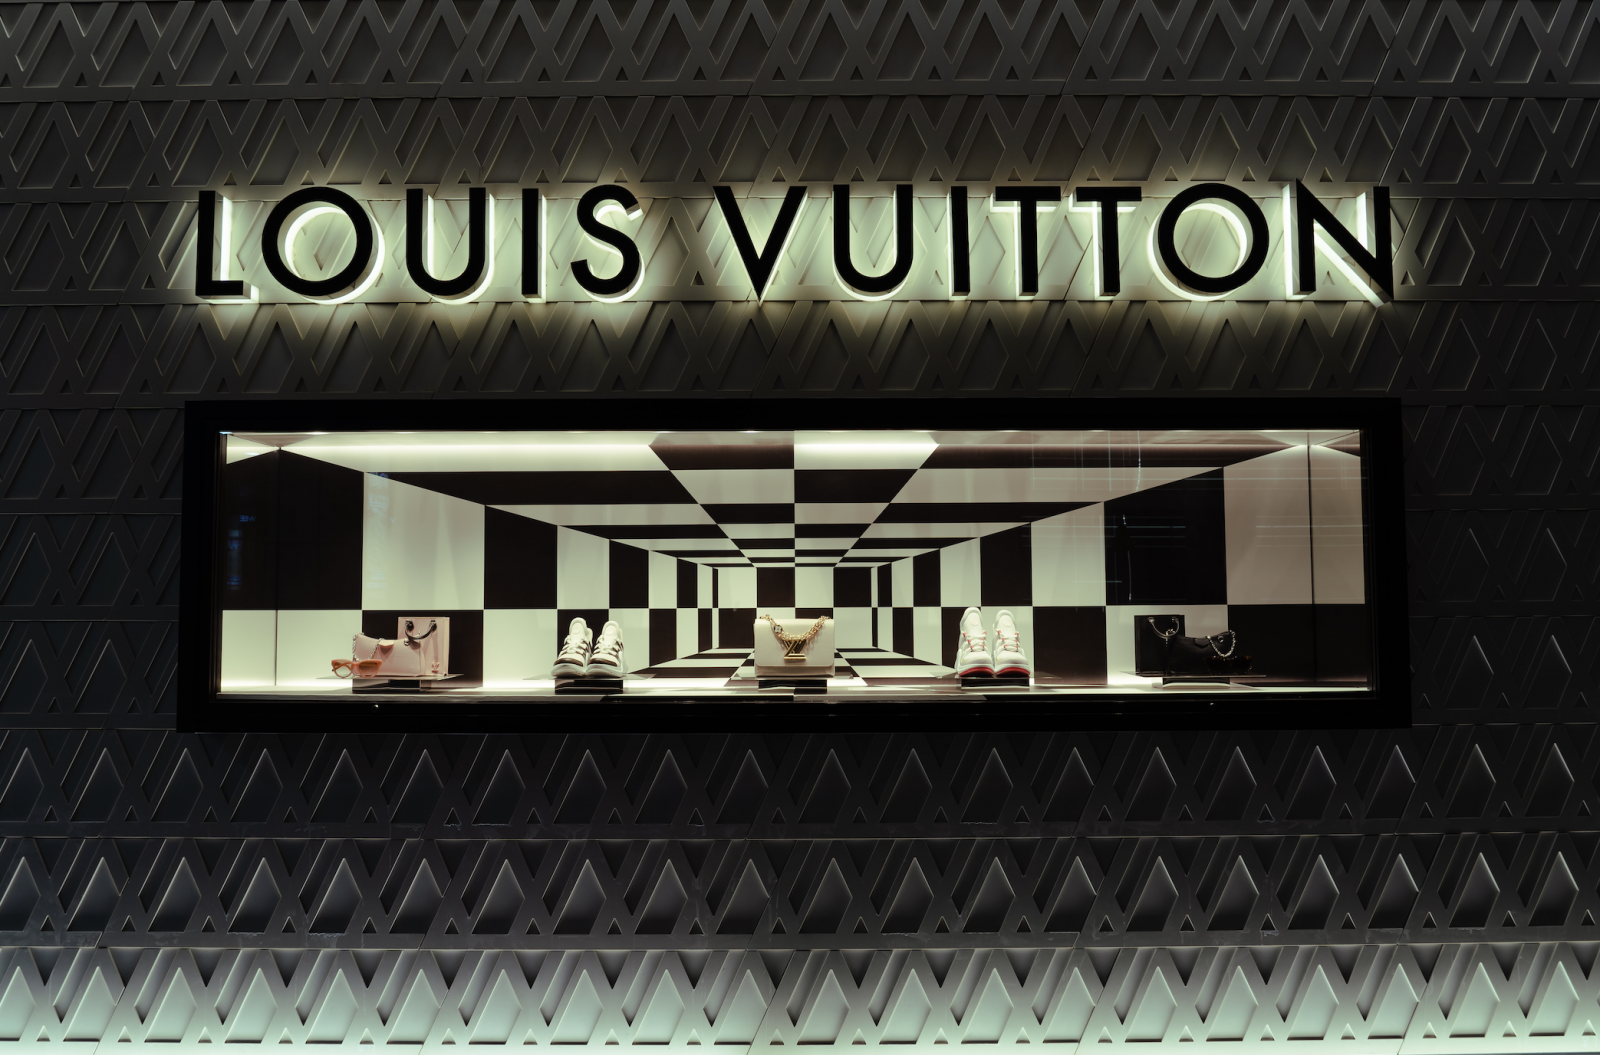 Louis Vuitton to 'Wind Down' Celebrity Core Values Ads